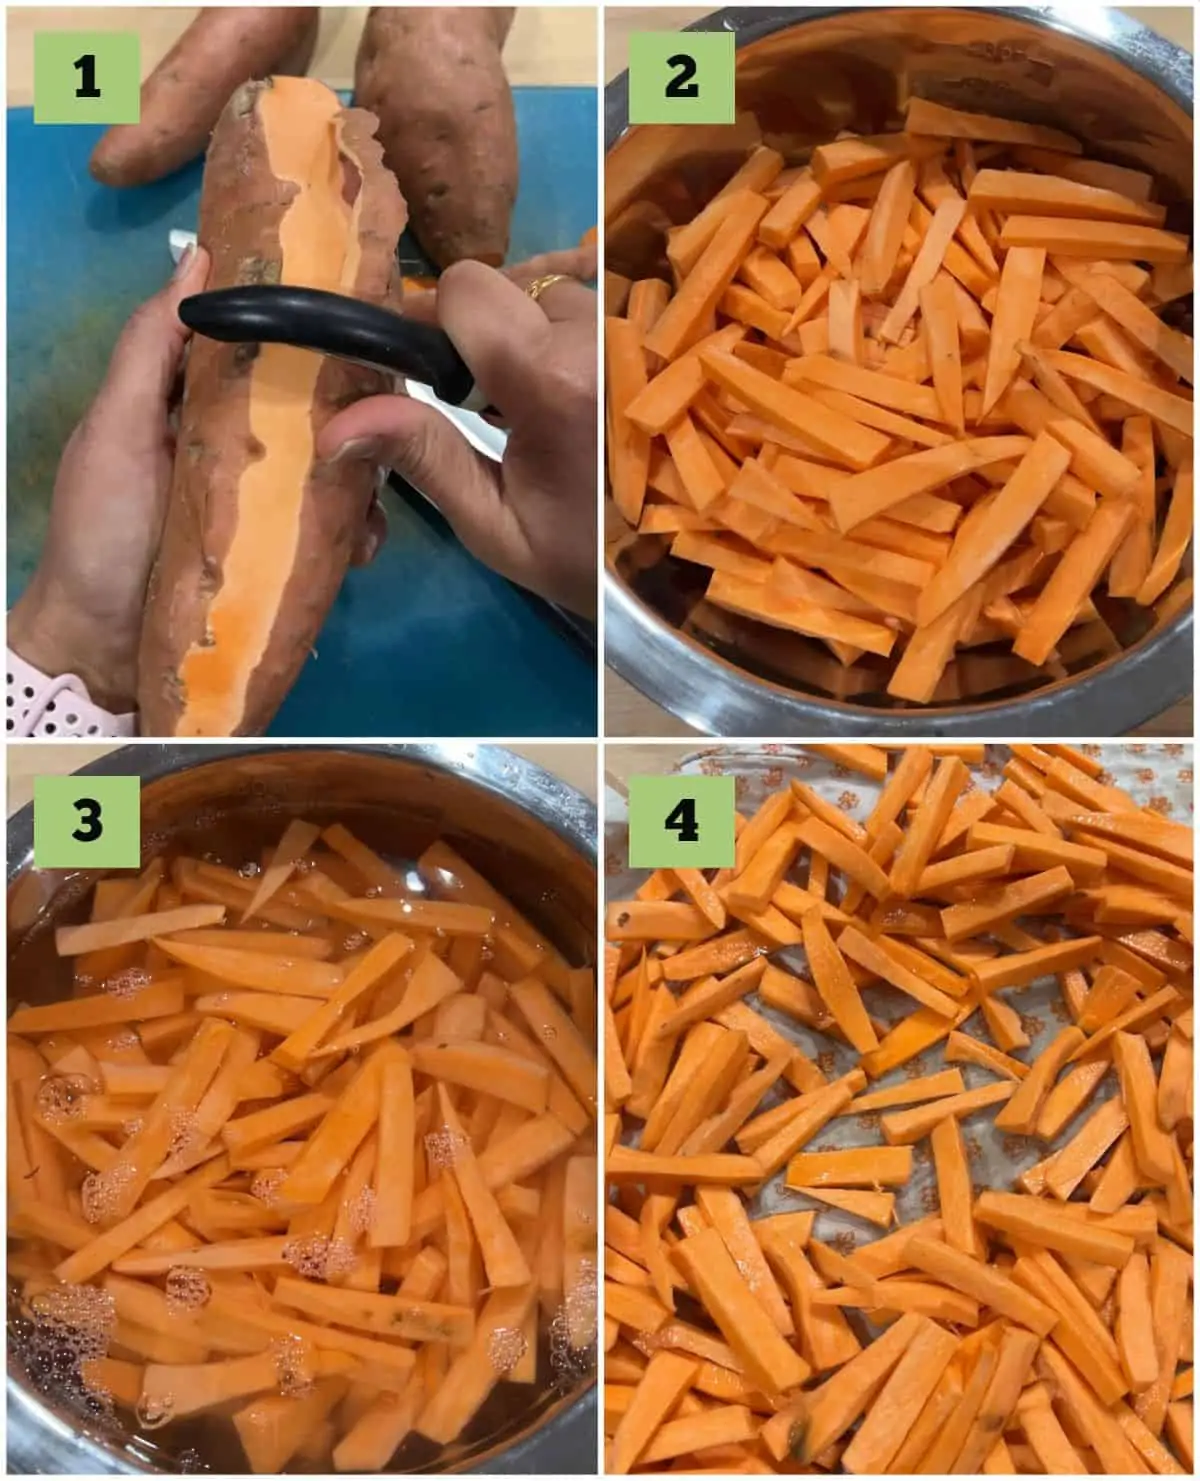 Process shot showing how to peel and clean sweet potato and how to cut them.